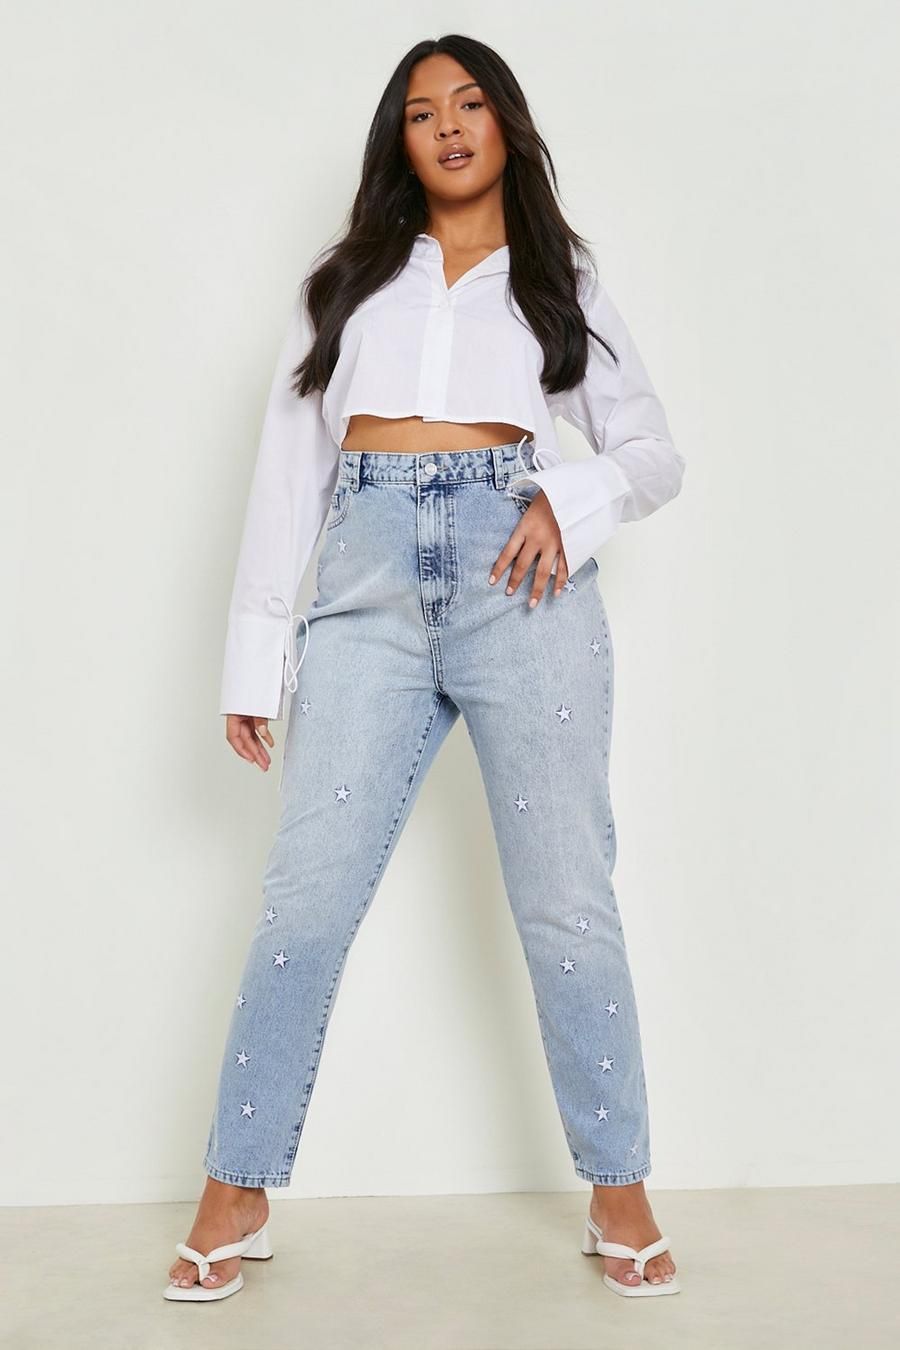 What Are The Best Jeans For Curvy Women?